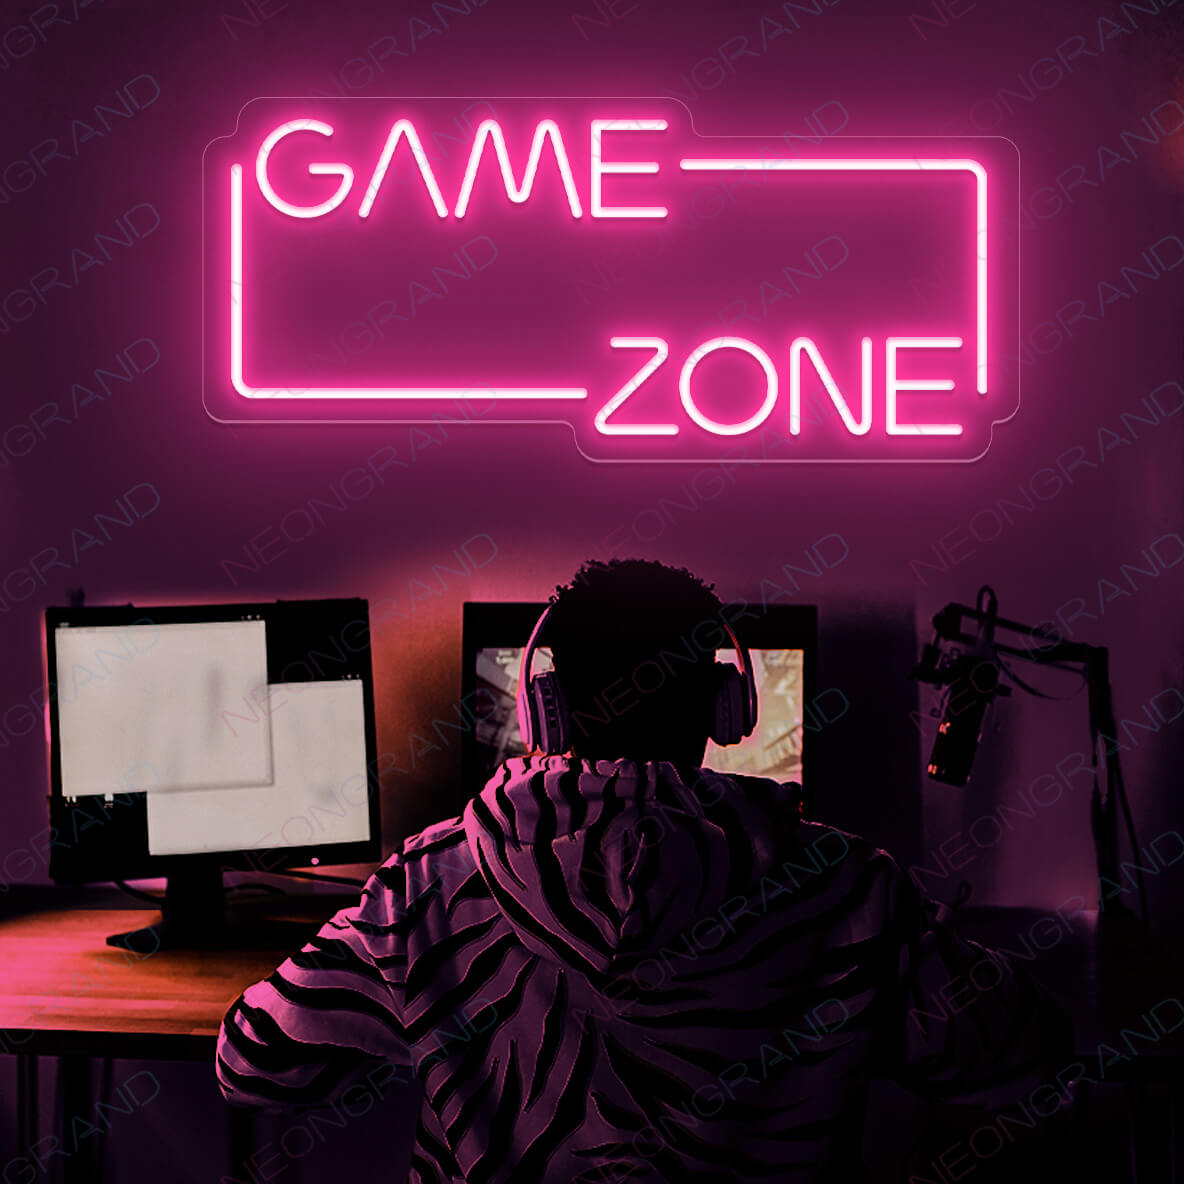 Neon Game Sign Game Zone Neon Sign Led Light pink